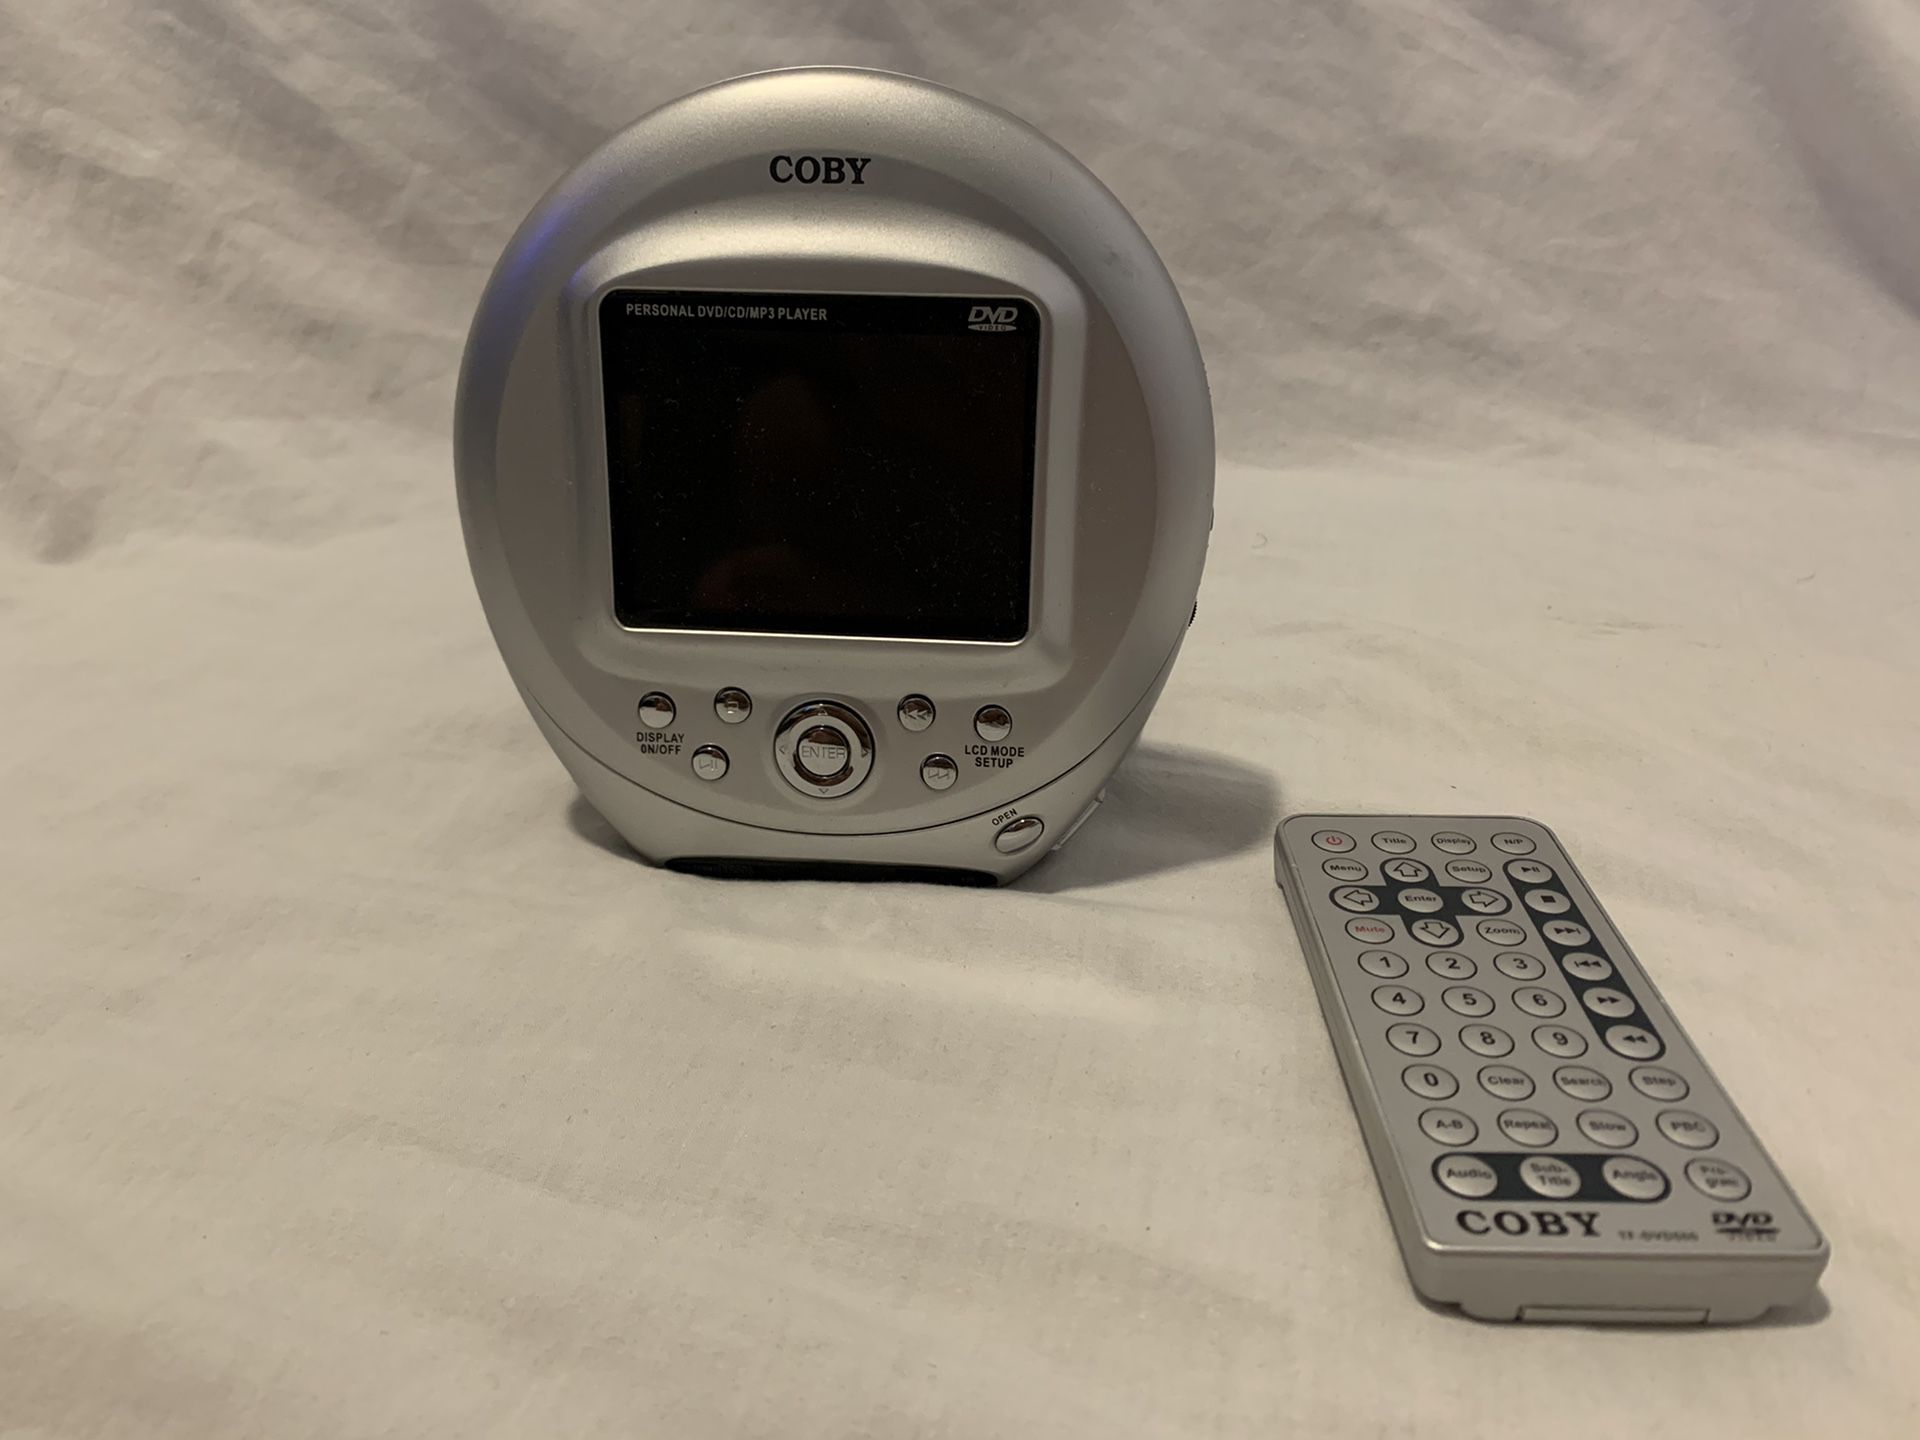 Coby Personal Dvd CD MP3 Player Model # TF-DVD500 Portable All In One